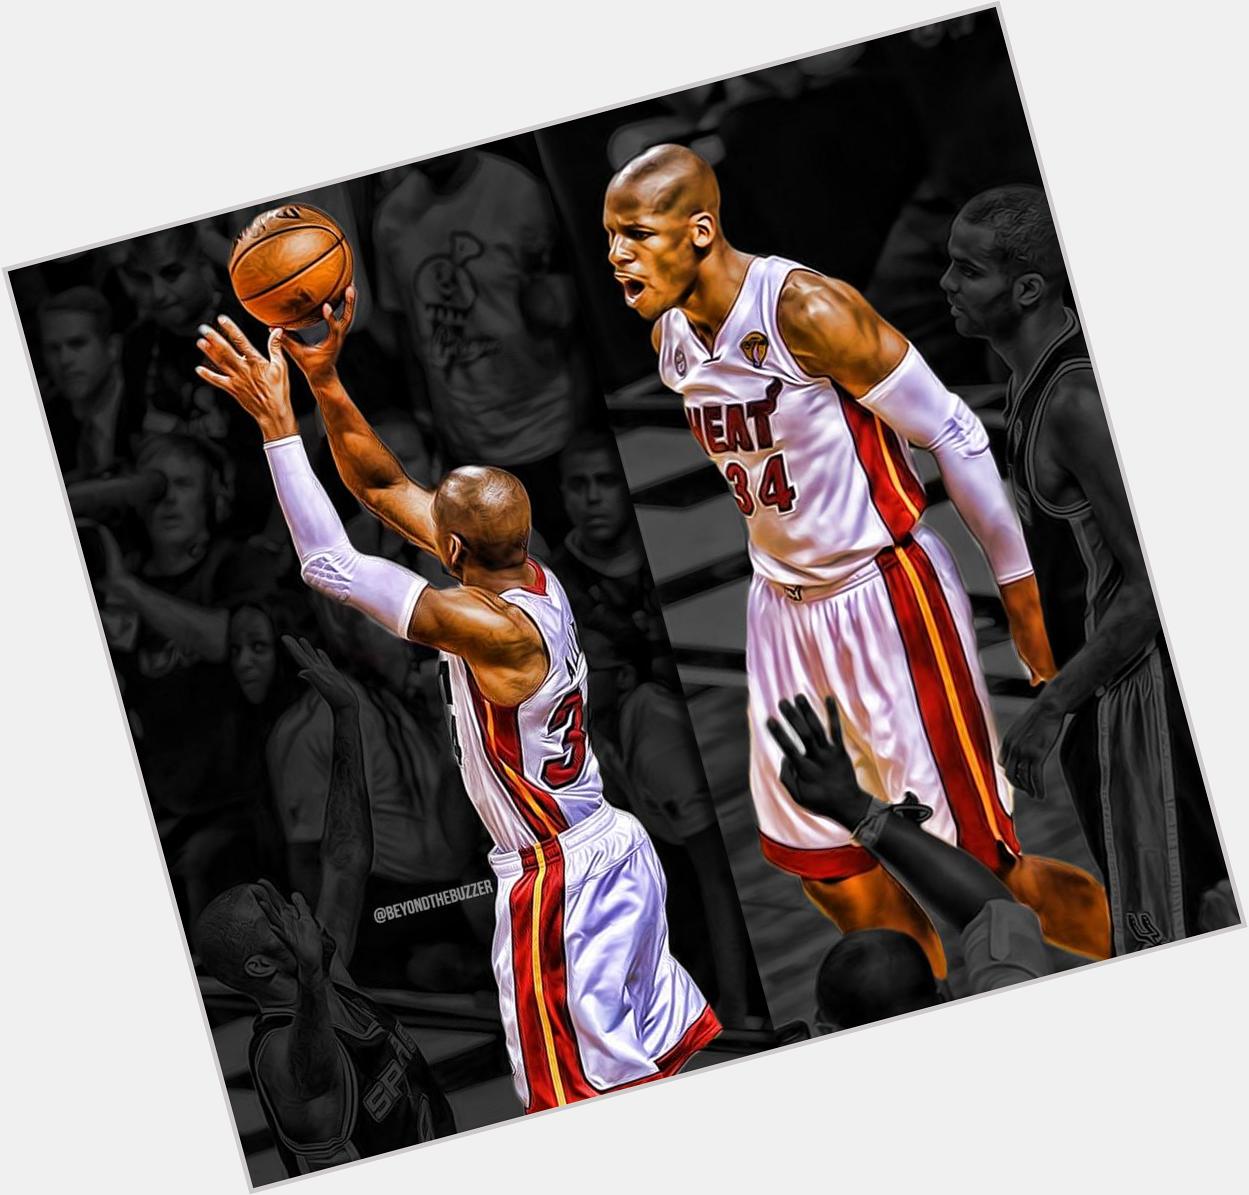 To wish Ray Allen a happy birthday! Hopefully his career is not over yet!  